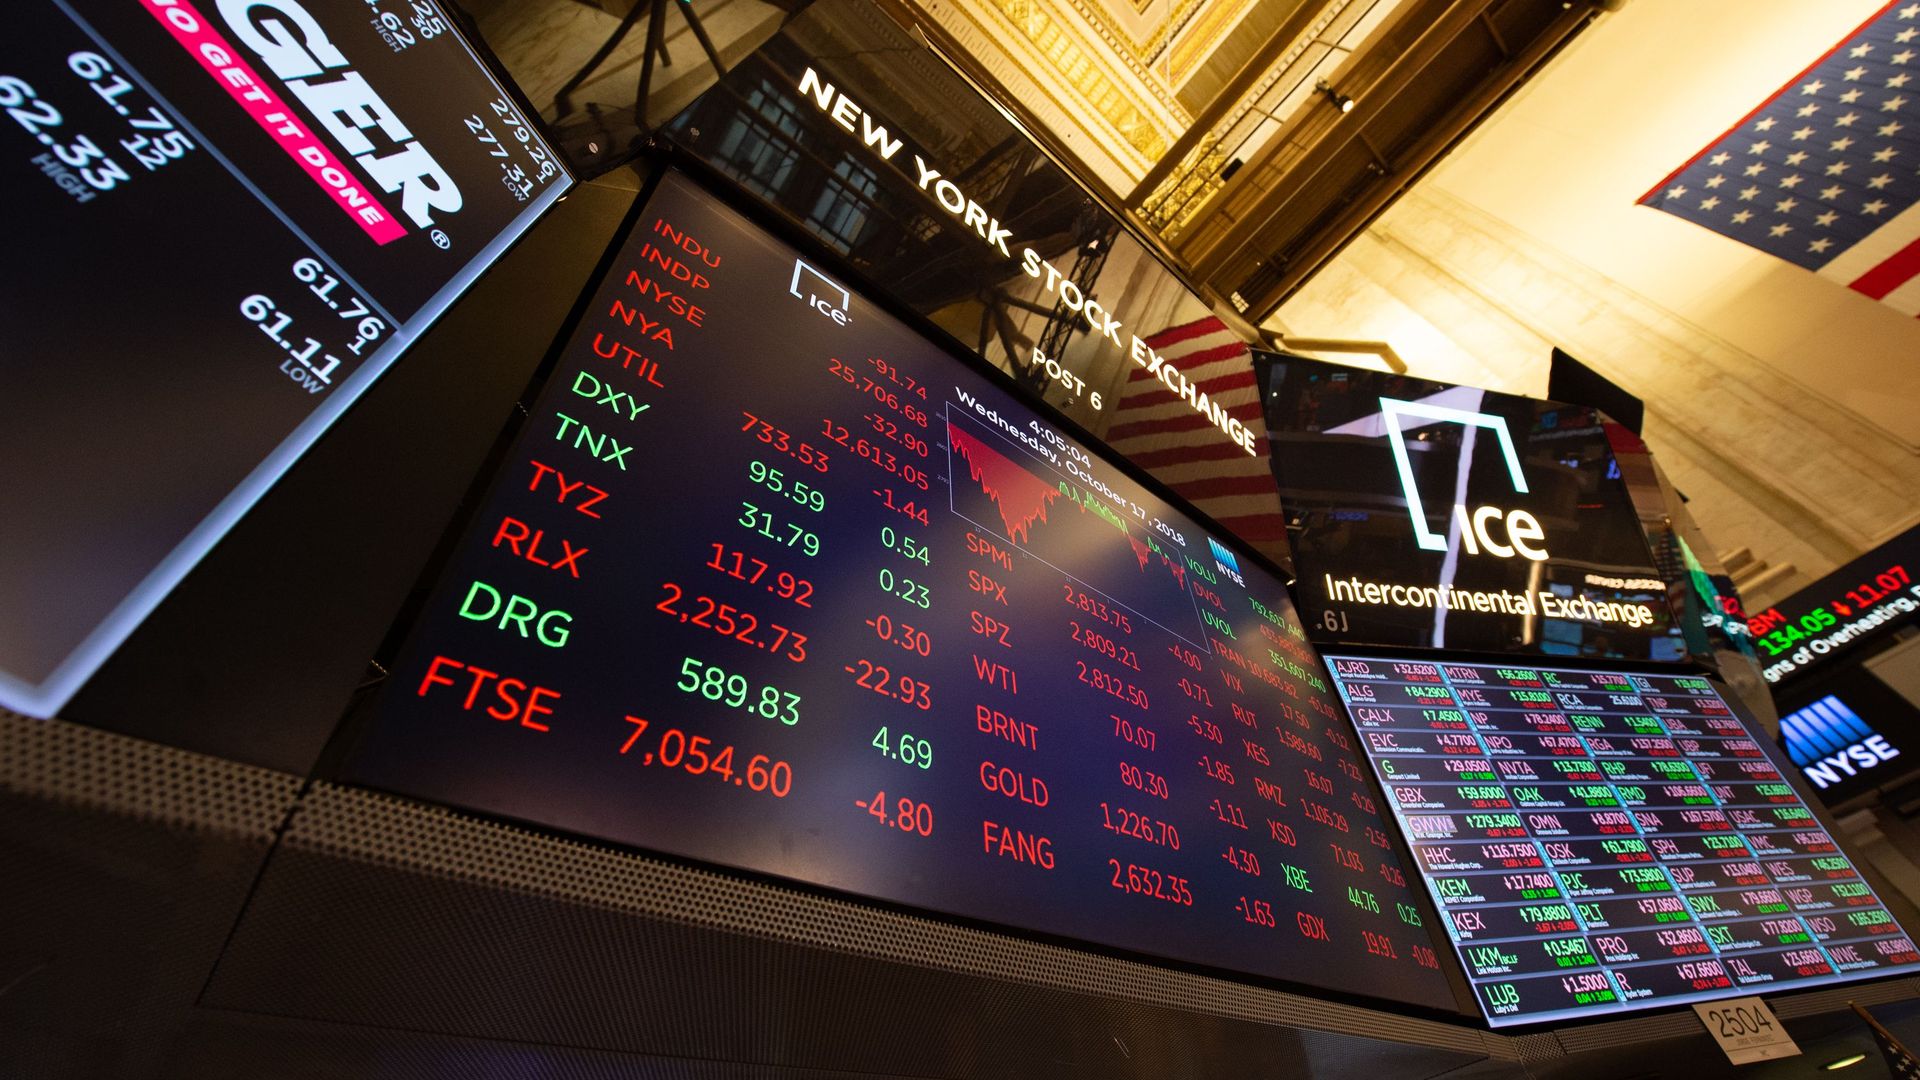 NYSE board with ticker symbols in green and red.